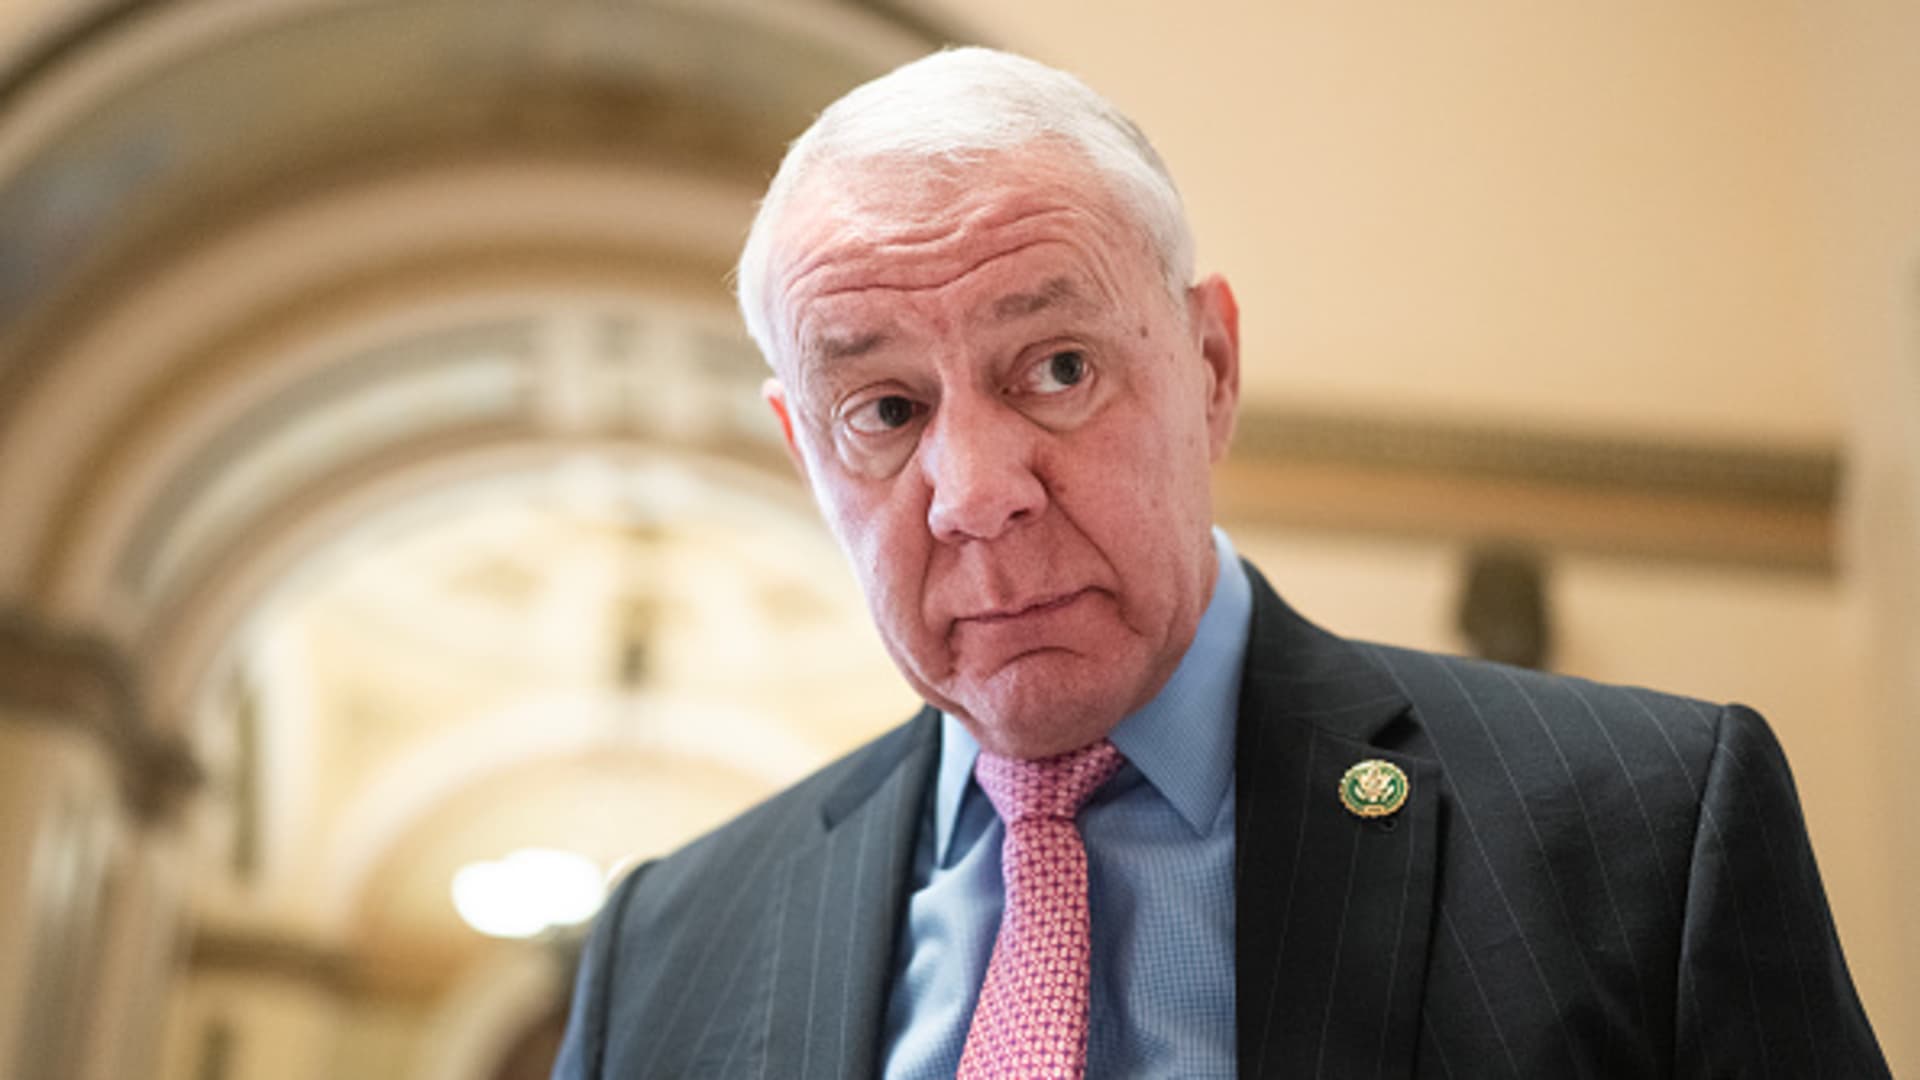 Rep. Ken Buck, R-Colo., talks with reporters before a procedural vote on the debt limit bill in the U.S. Capitol on Wednesday, May 31, 2023.